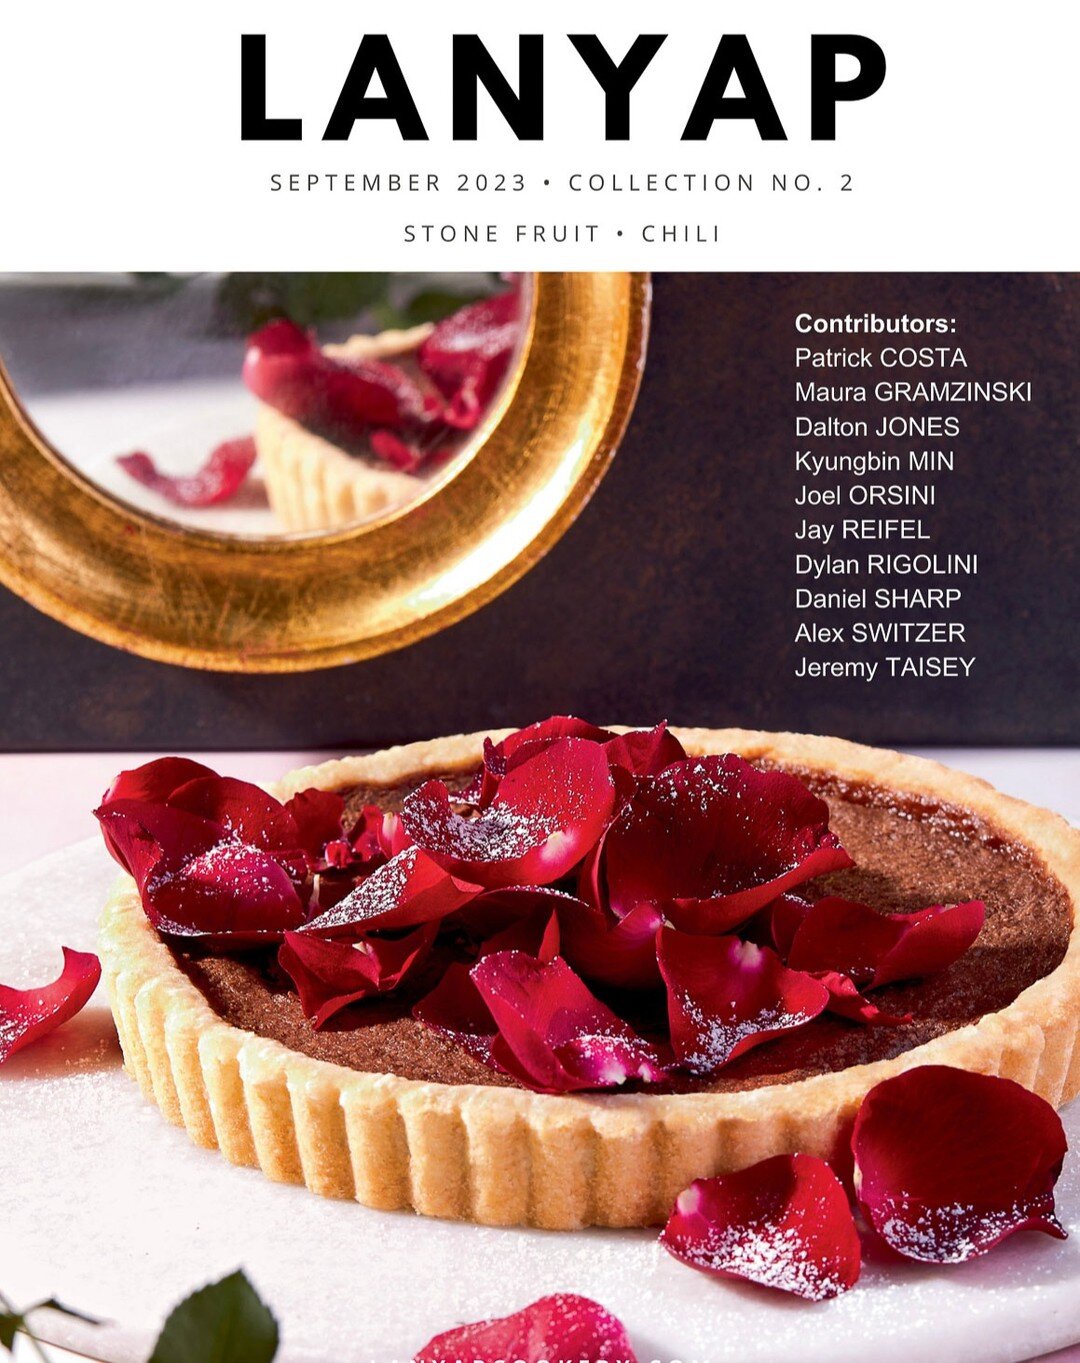 Recipe collection 2: Stone Fruit &amp; Chilies

This picture is a Cherry Tart with Rose Petals from the new cookbook &quot;A History of the World in 10 Dinners: 2,000 Years, 100 Recipes&quot; by Jay Reifel &amp; Victoria Flexner. 

Check out the reci